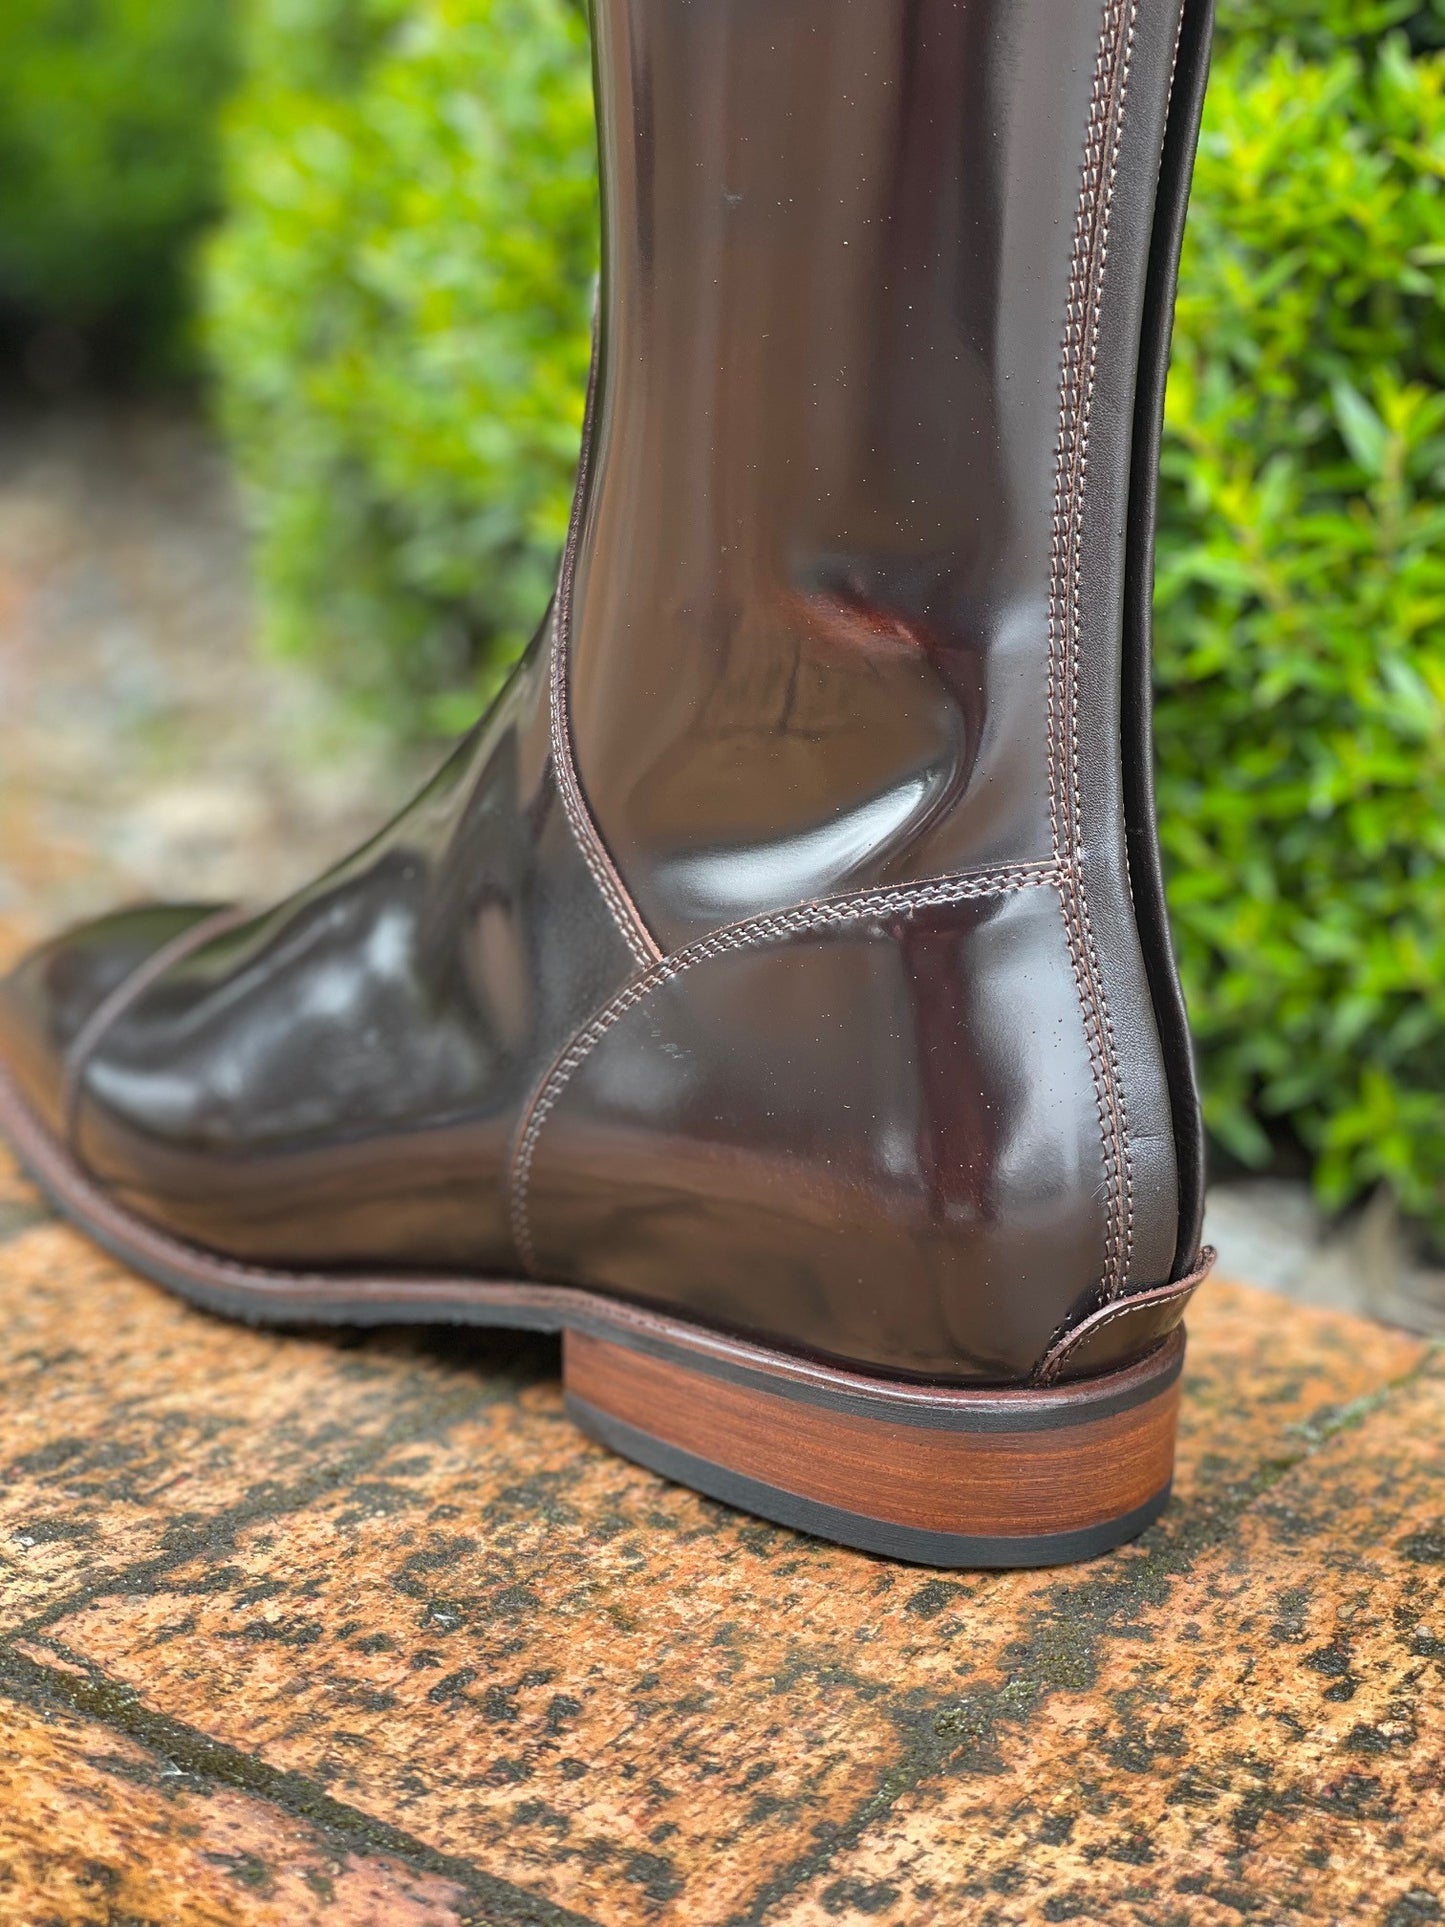 DENIRO S2601 DRESSAGE TALL BOOT - BRUSH BROWN WITH PICCOLO TOP